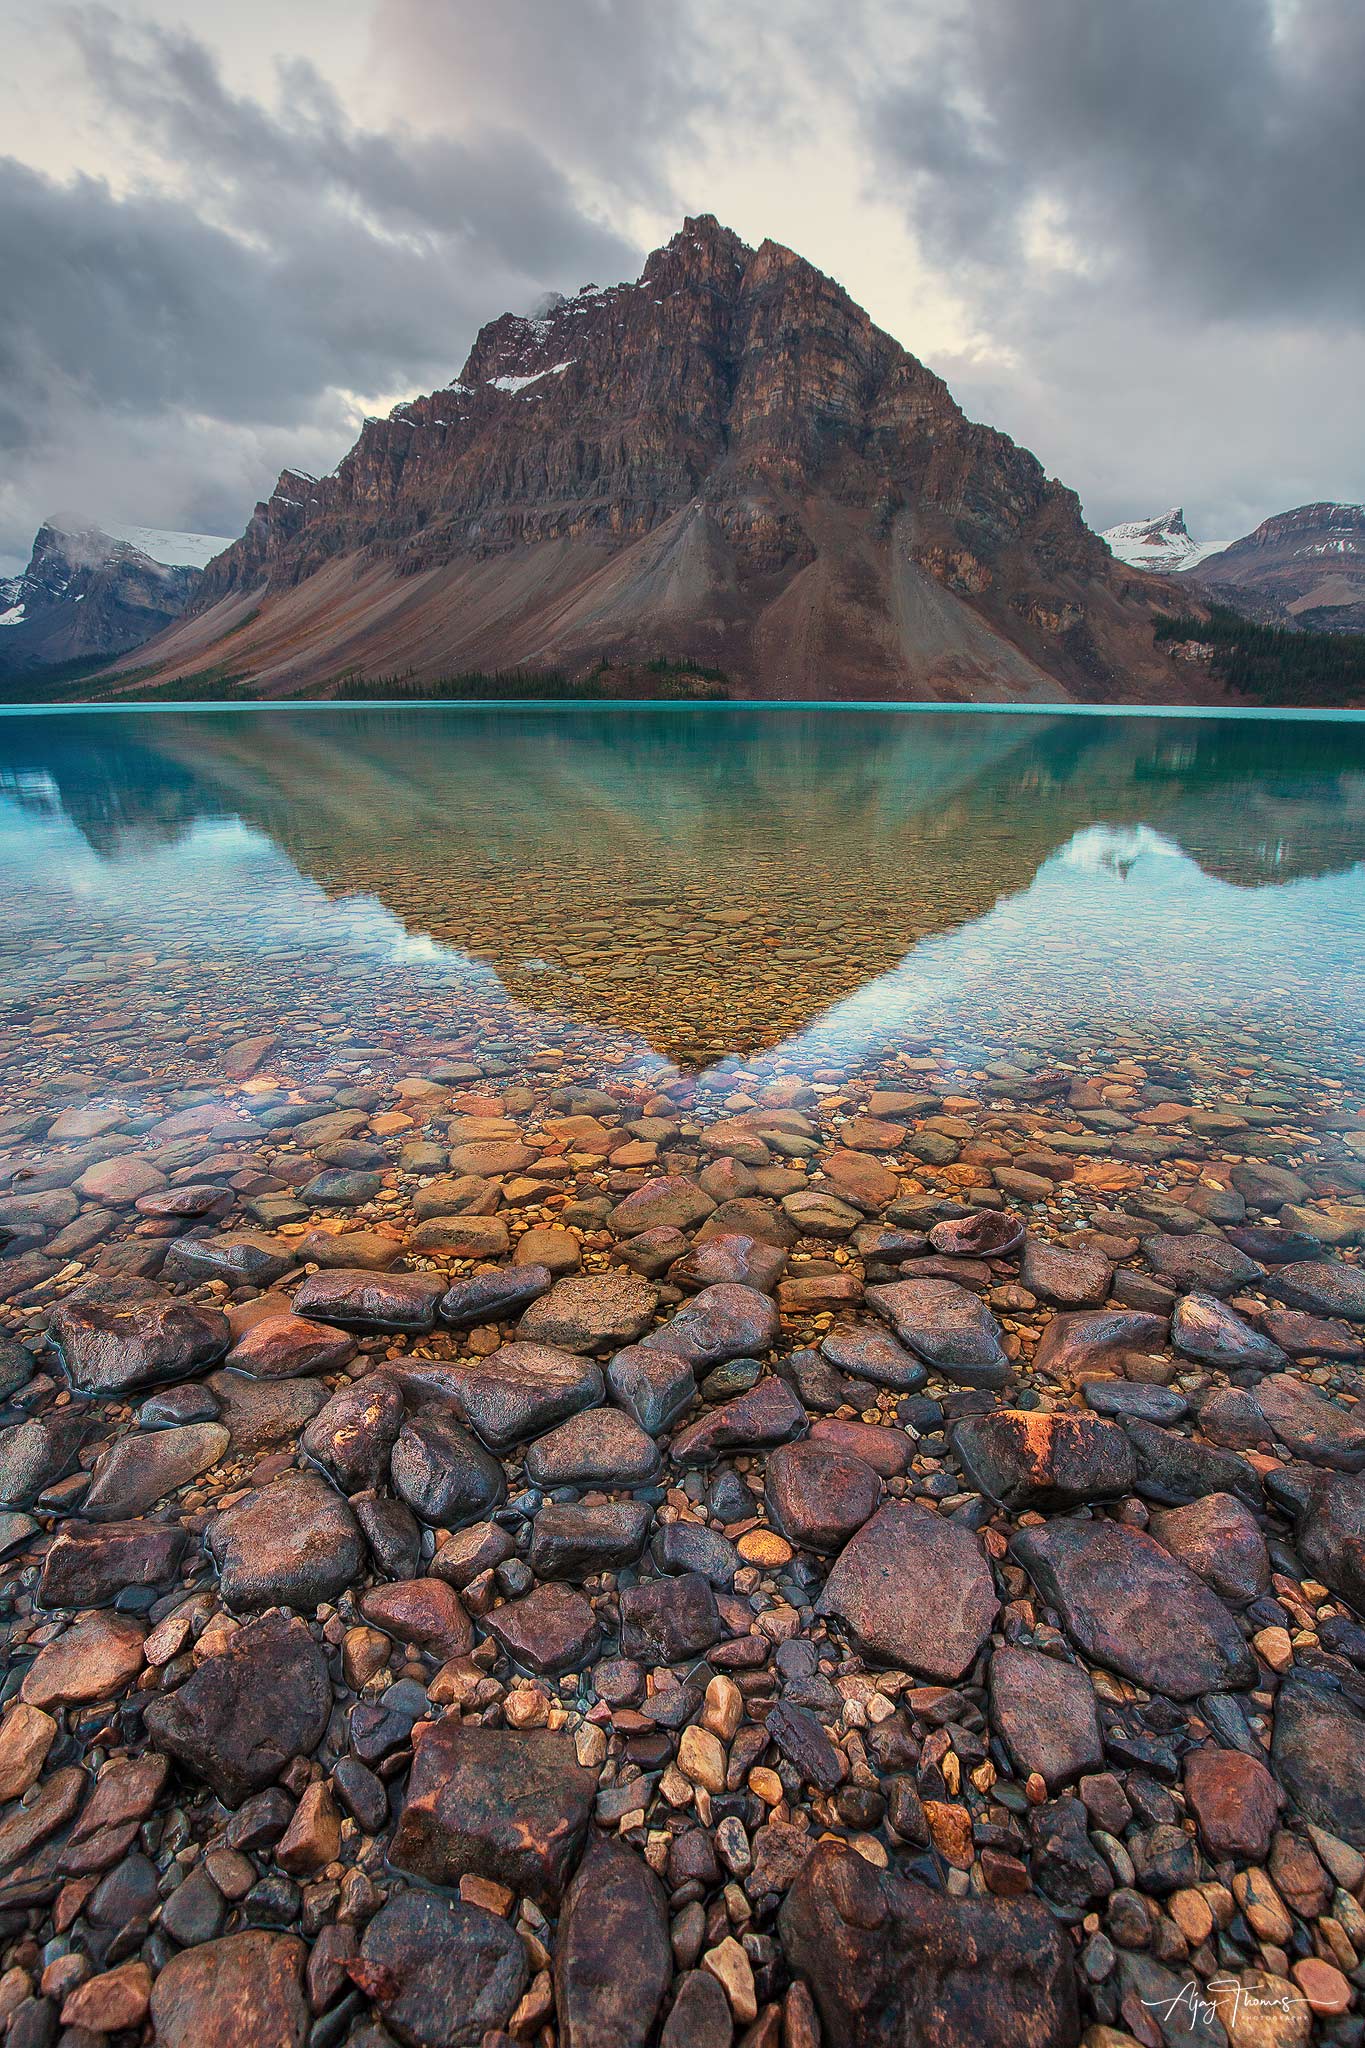 Majestic peaks of the mountain rising in the background, with the serene waters of the lake in the foreground, and the pebbles...